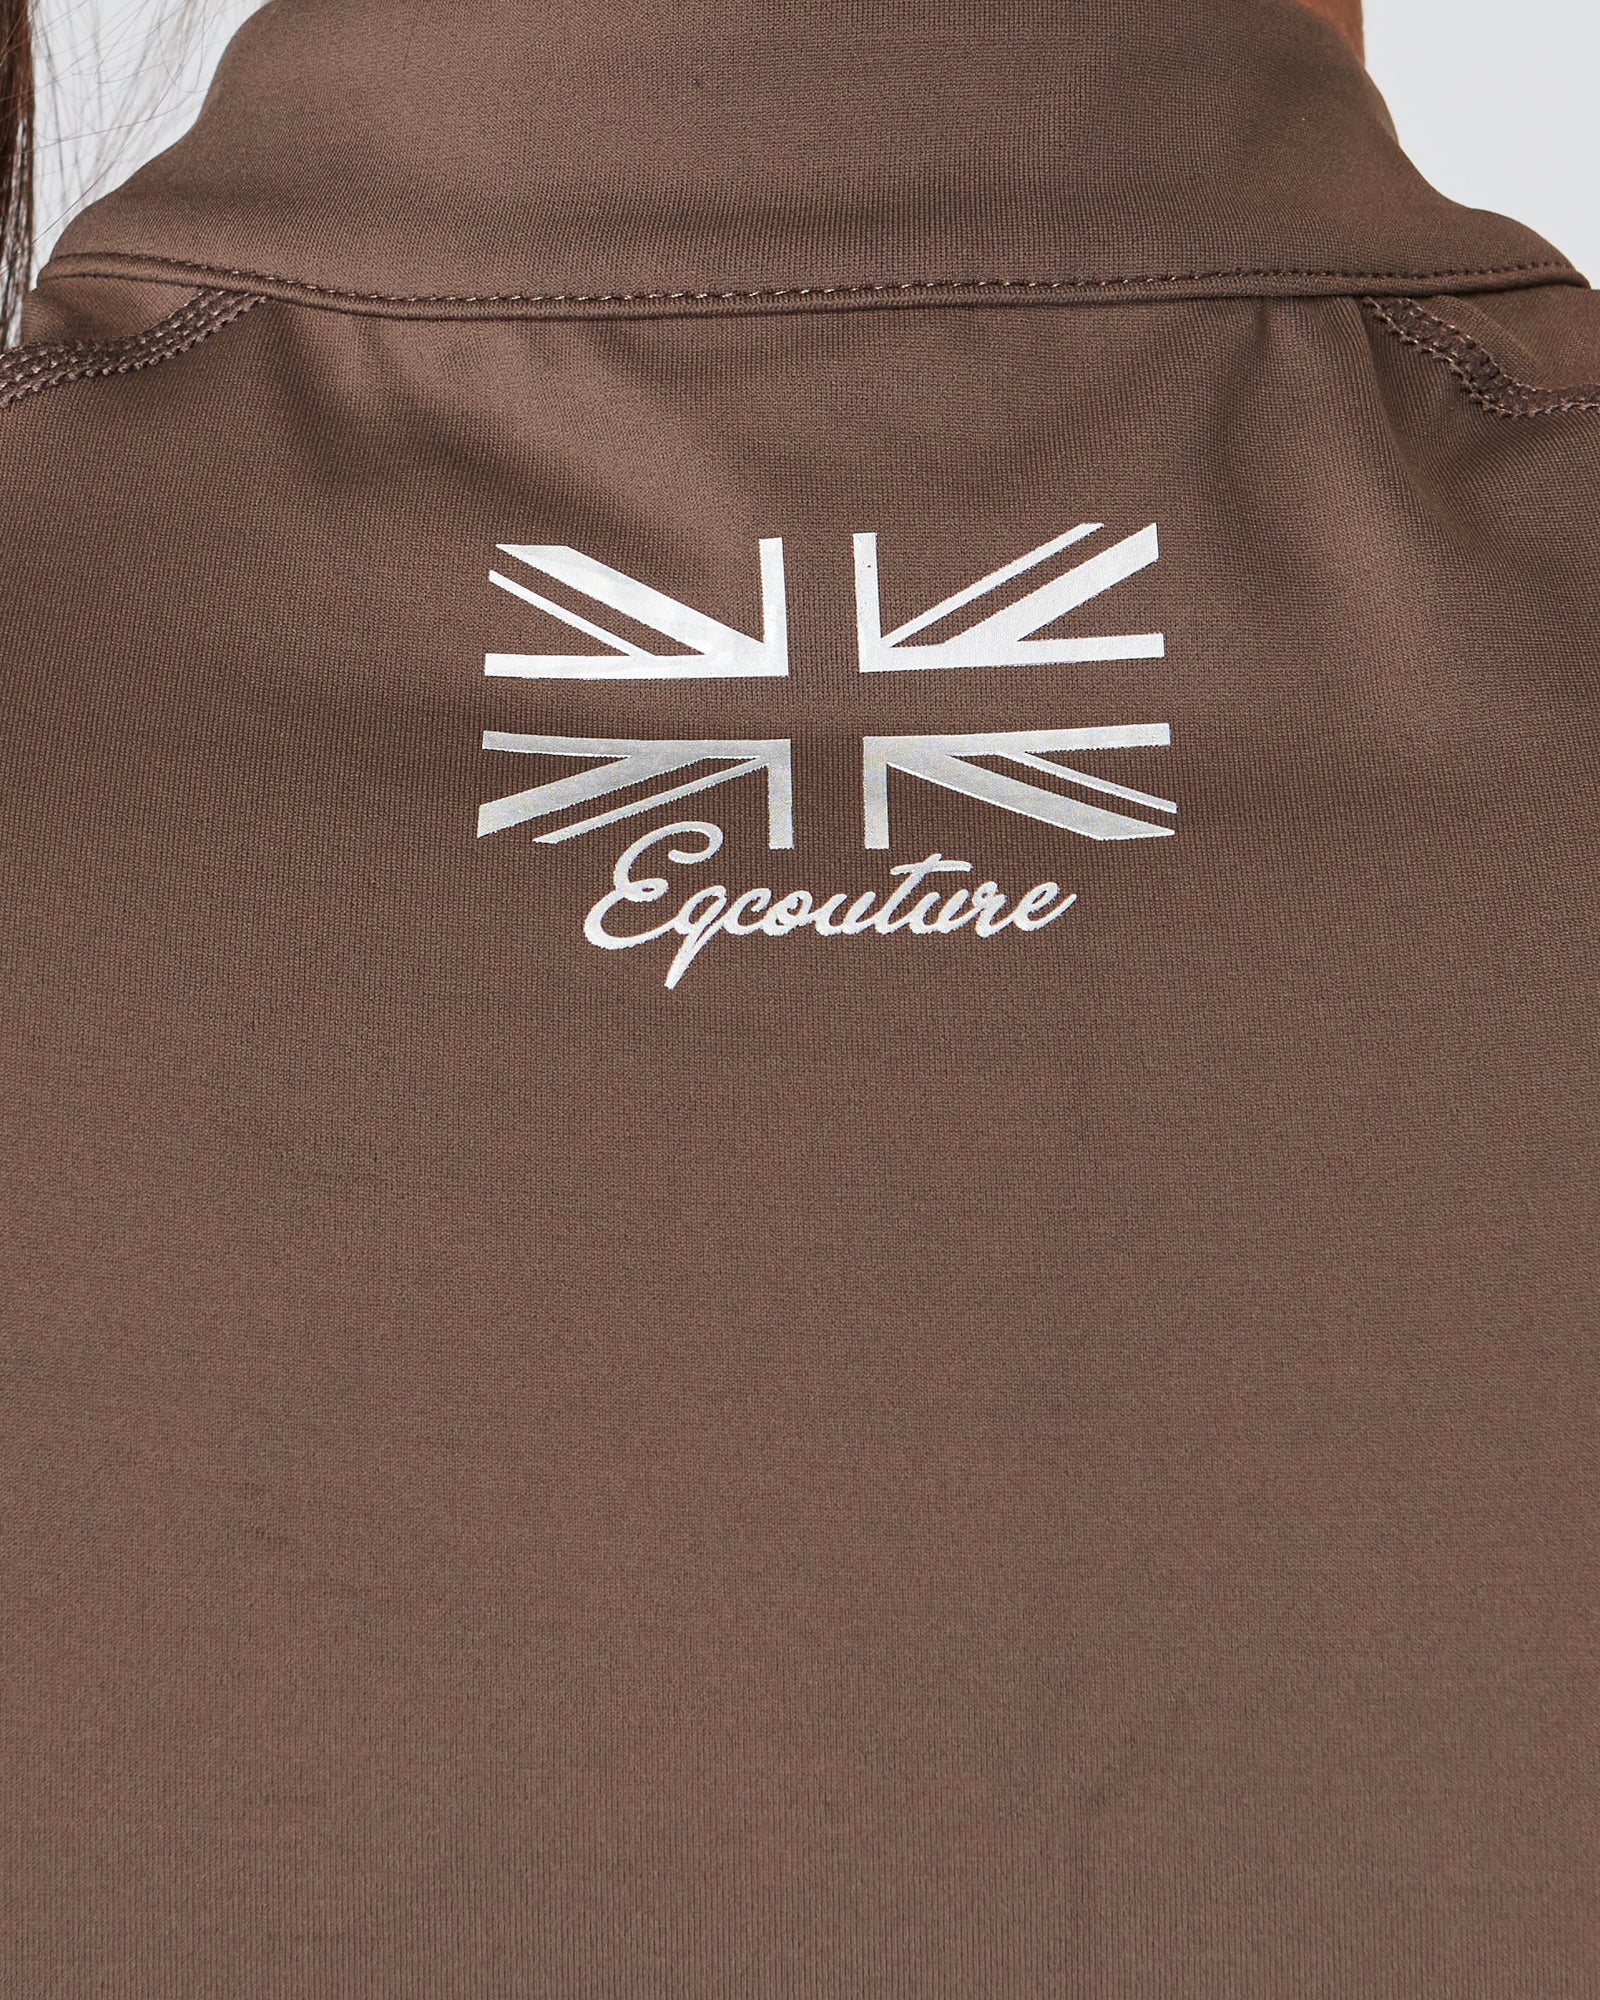 Equestrian brown short sleeve riding top / base layer / sports riding top- Eqcouture..